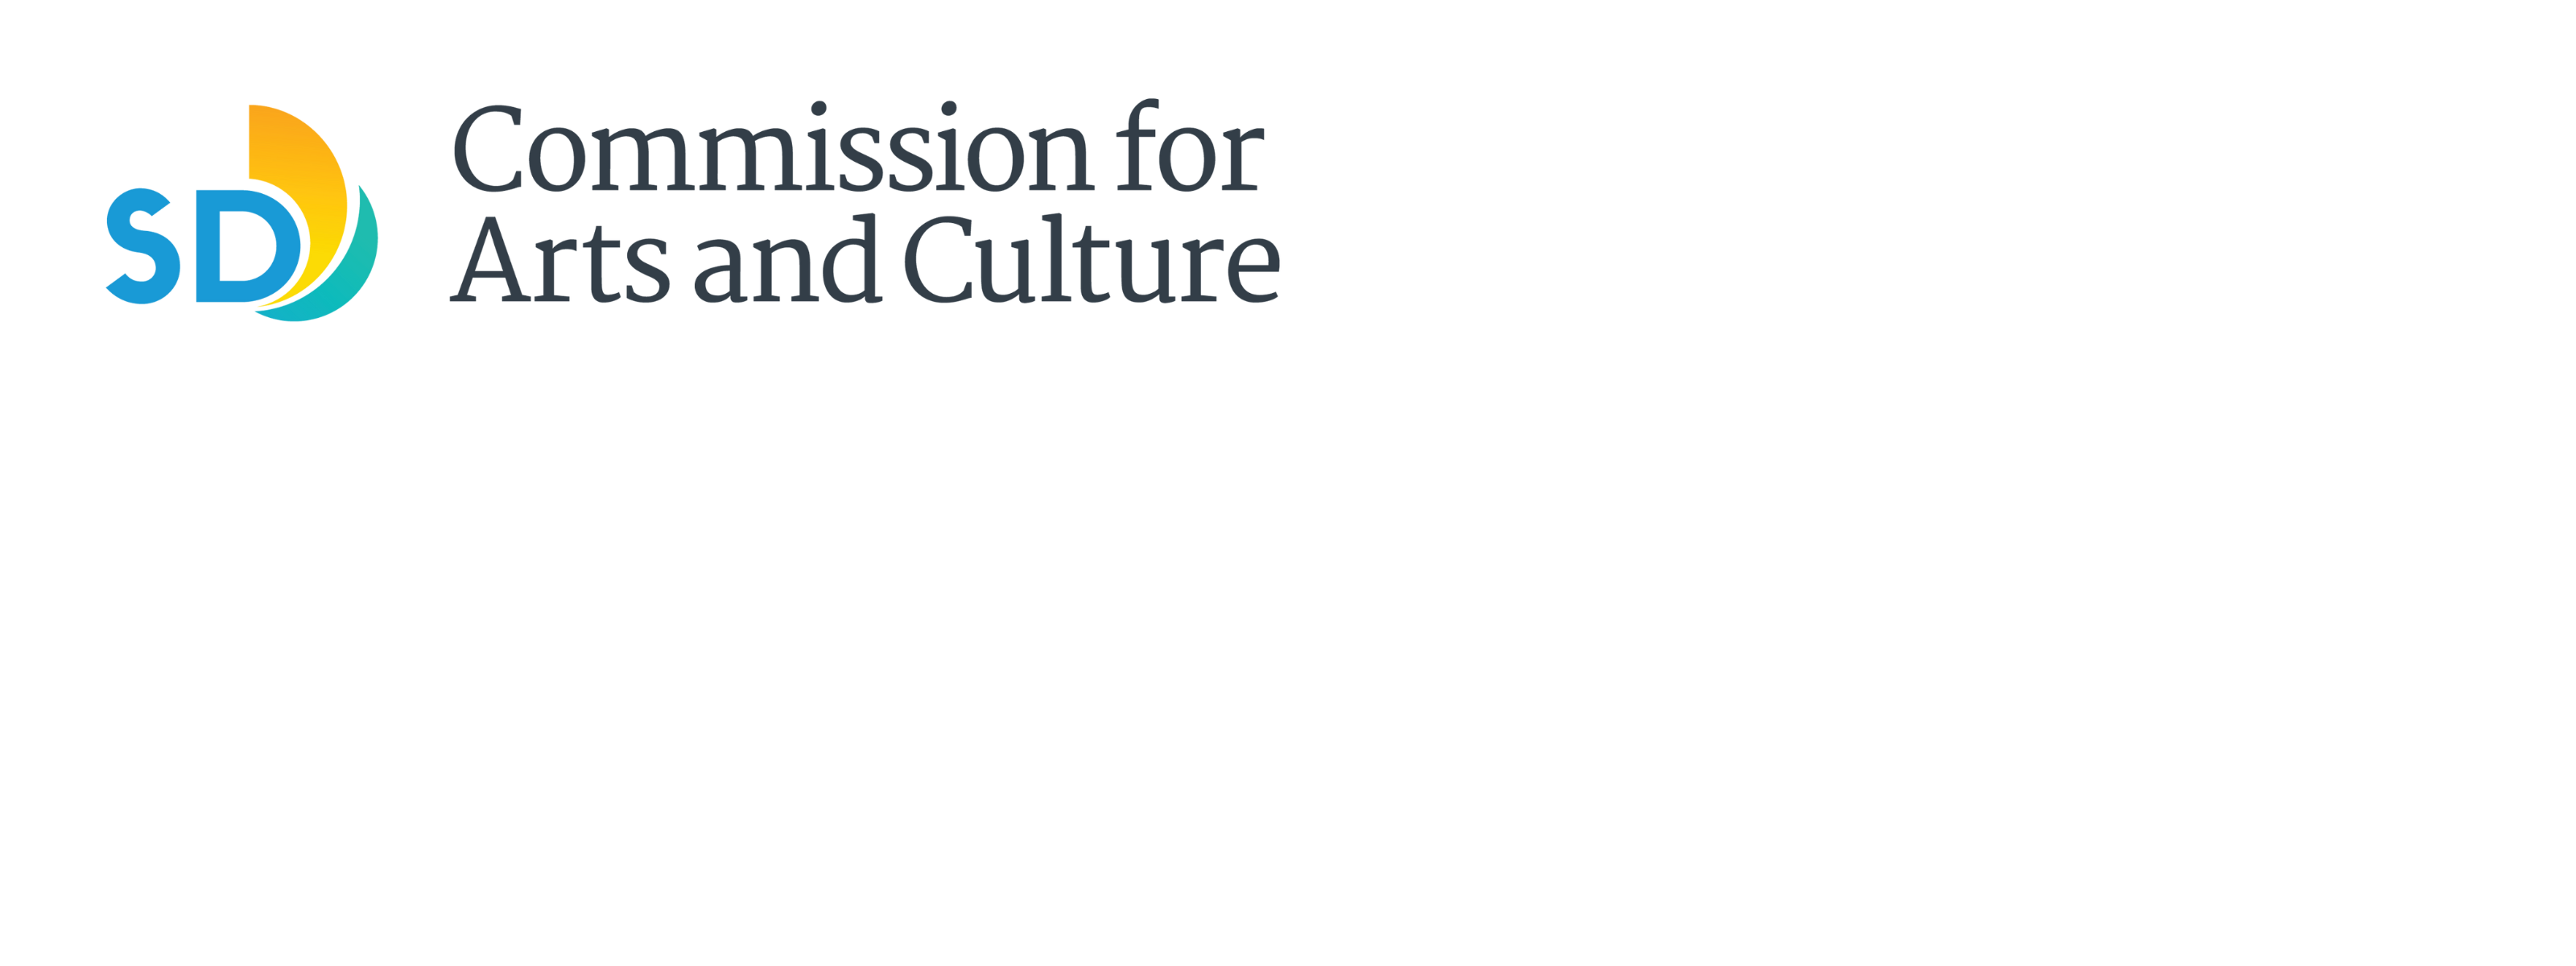 The logo for the San Diego Commission for Arts and Culture